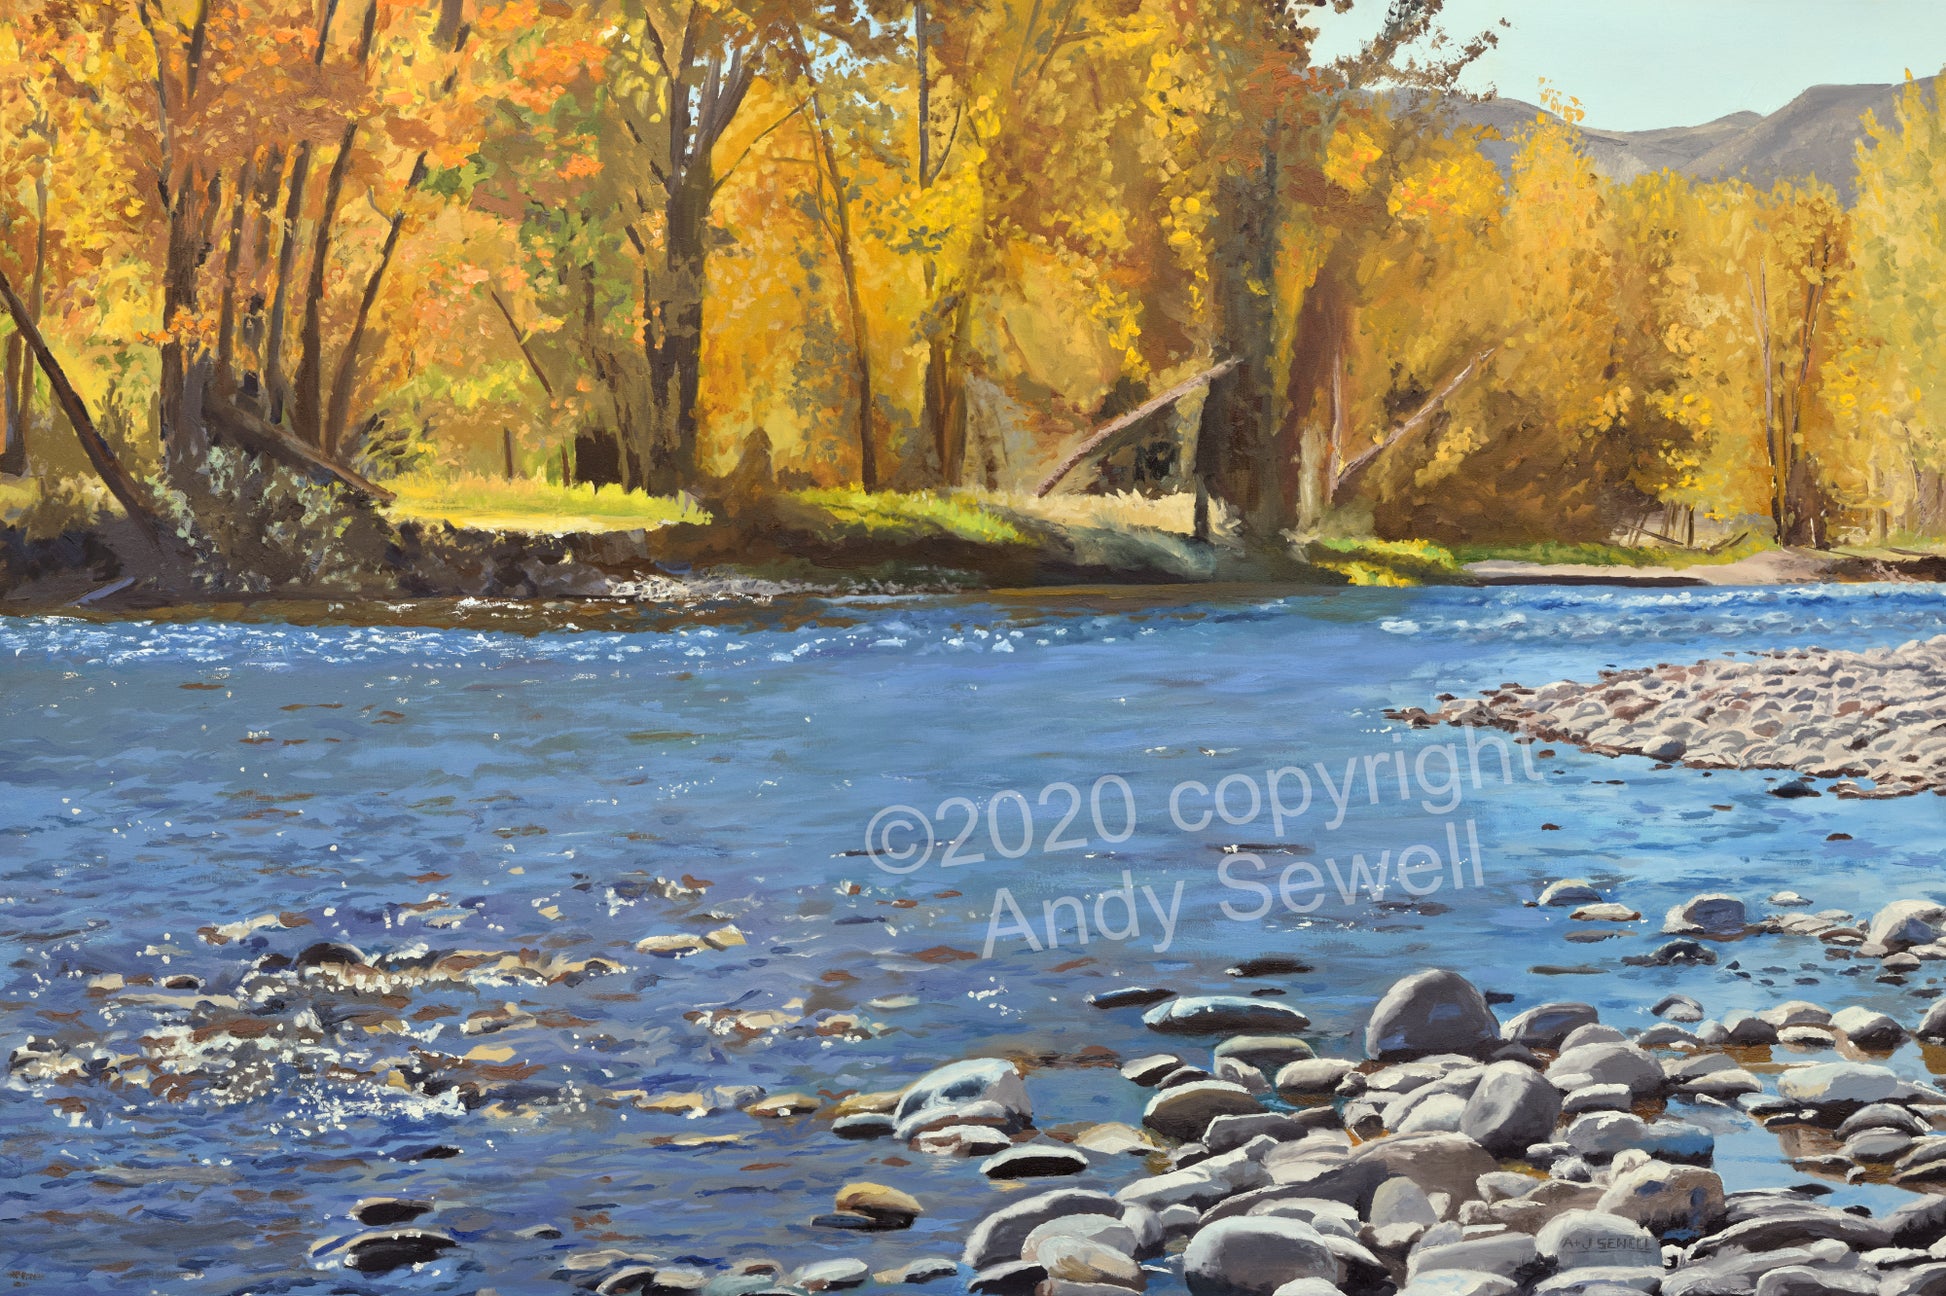 Title: "River Gold"  • 58x38 oil painting